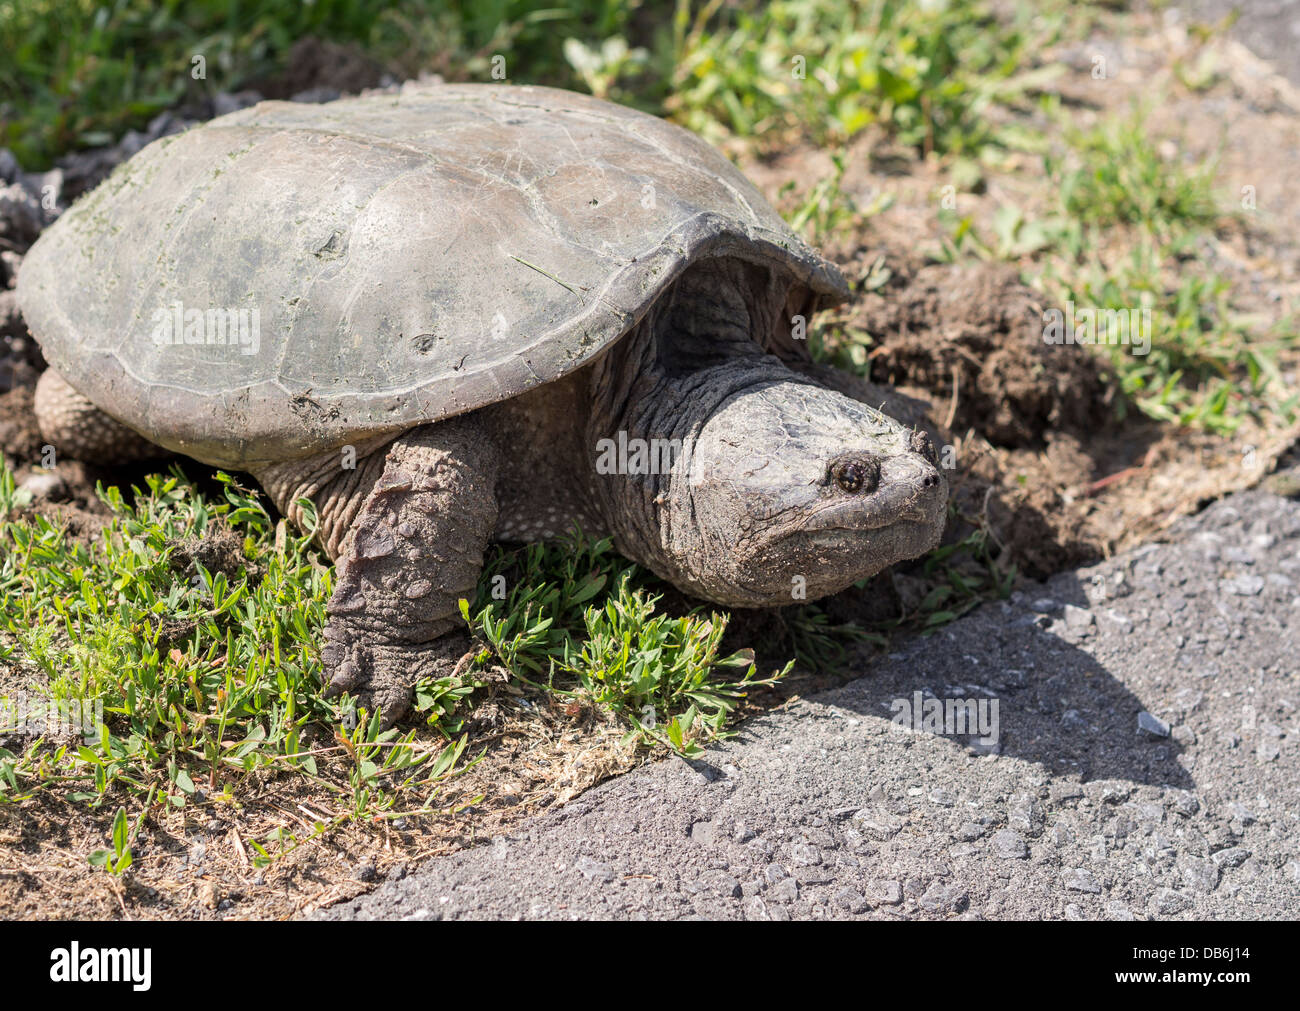 Female Snapping Turtle side view. Large turtle laying eggs at the side of a road. Ottawa, Ontario, Canada Stock Photo